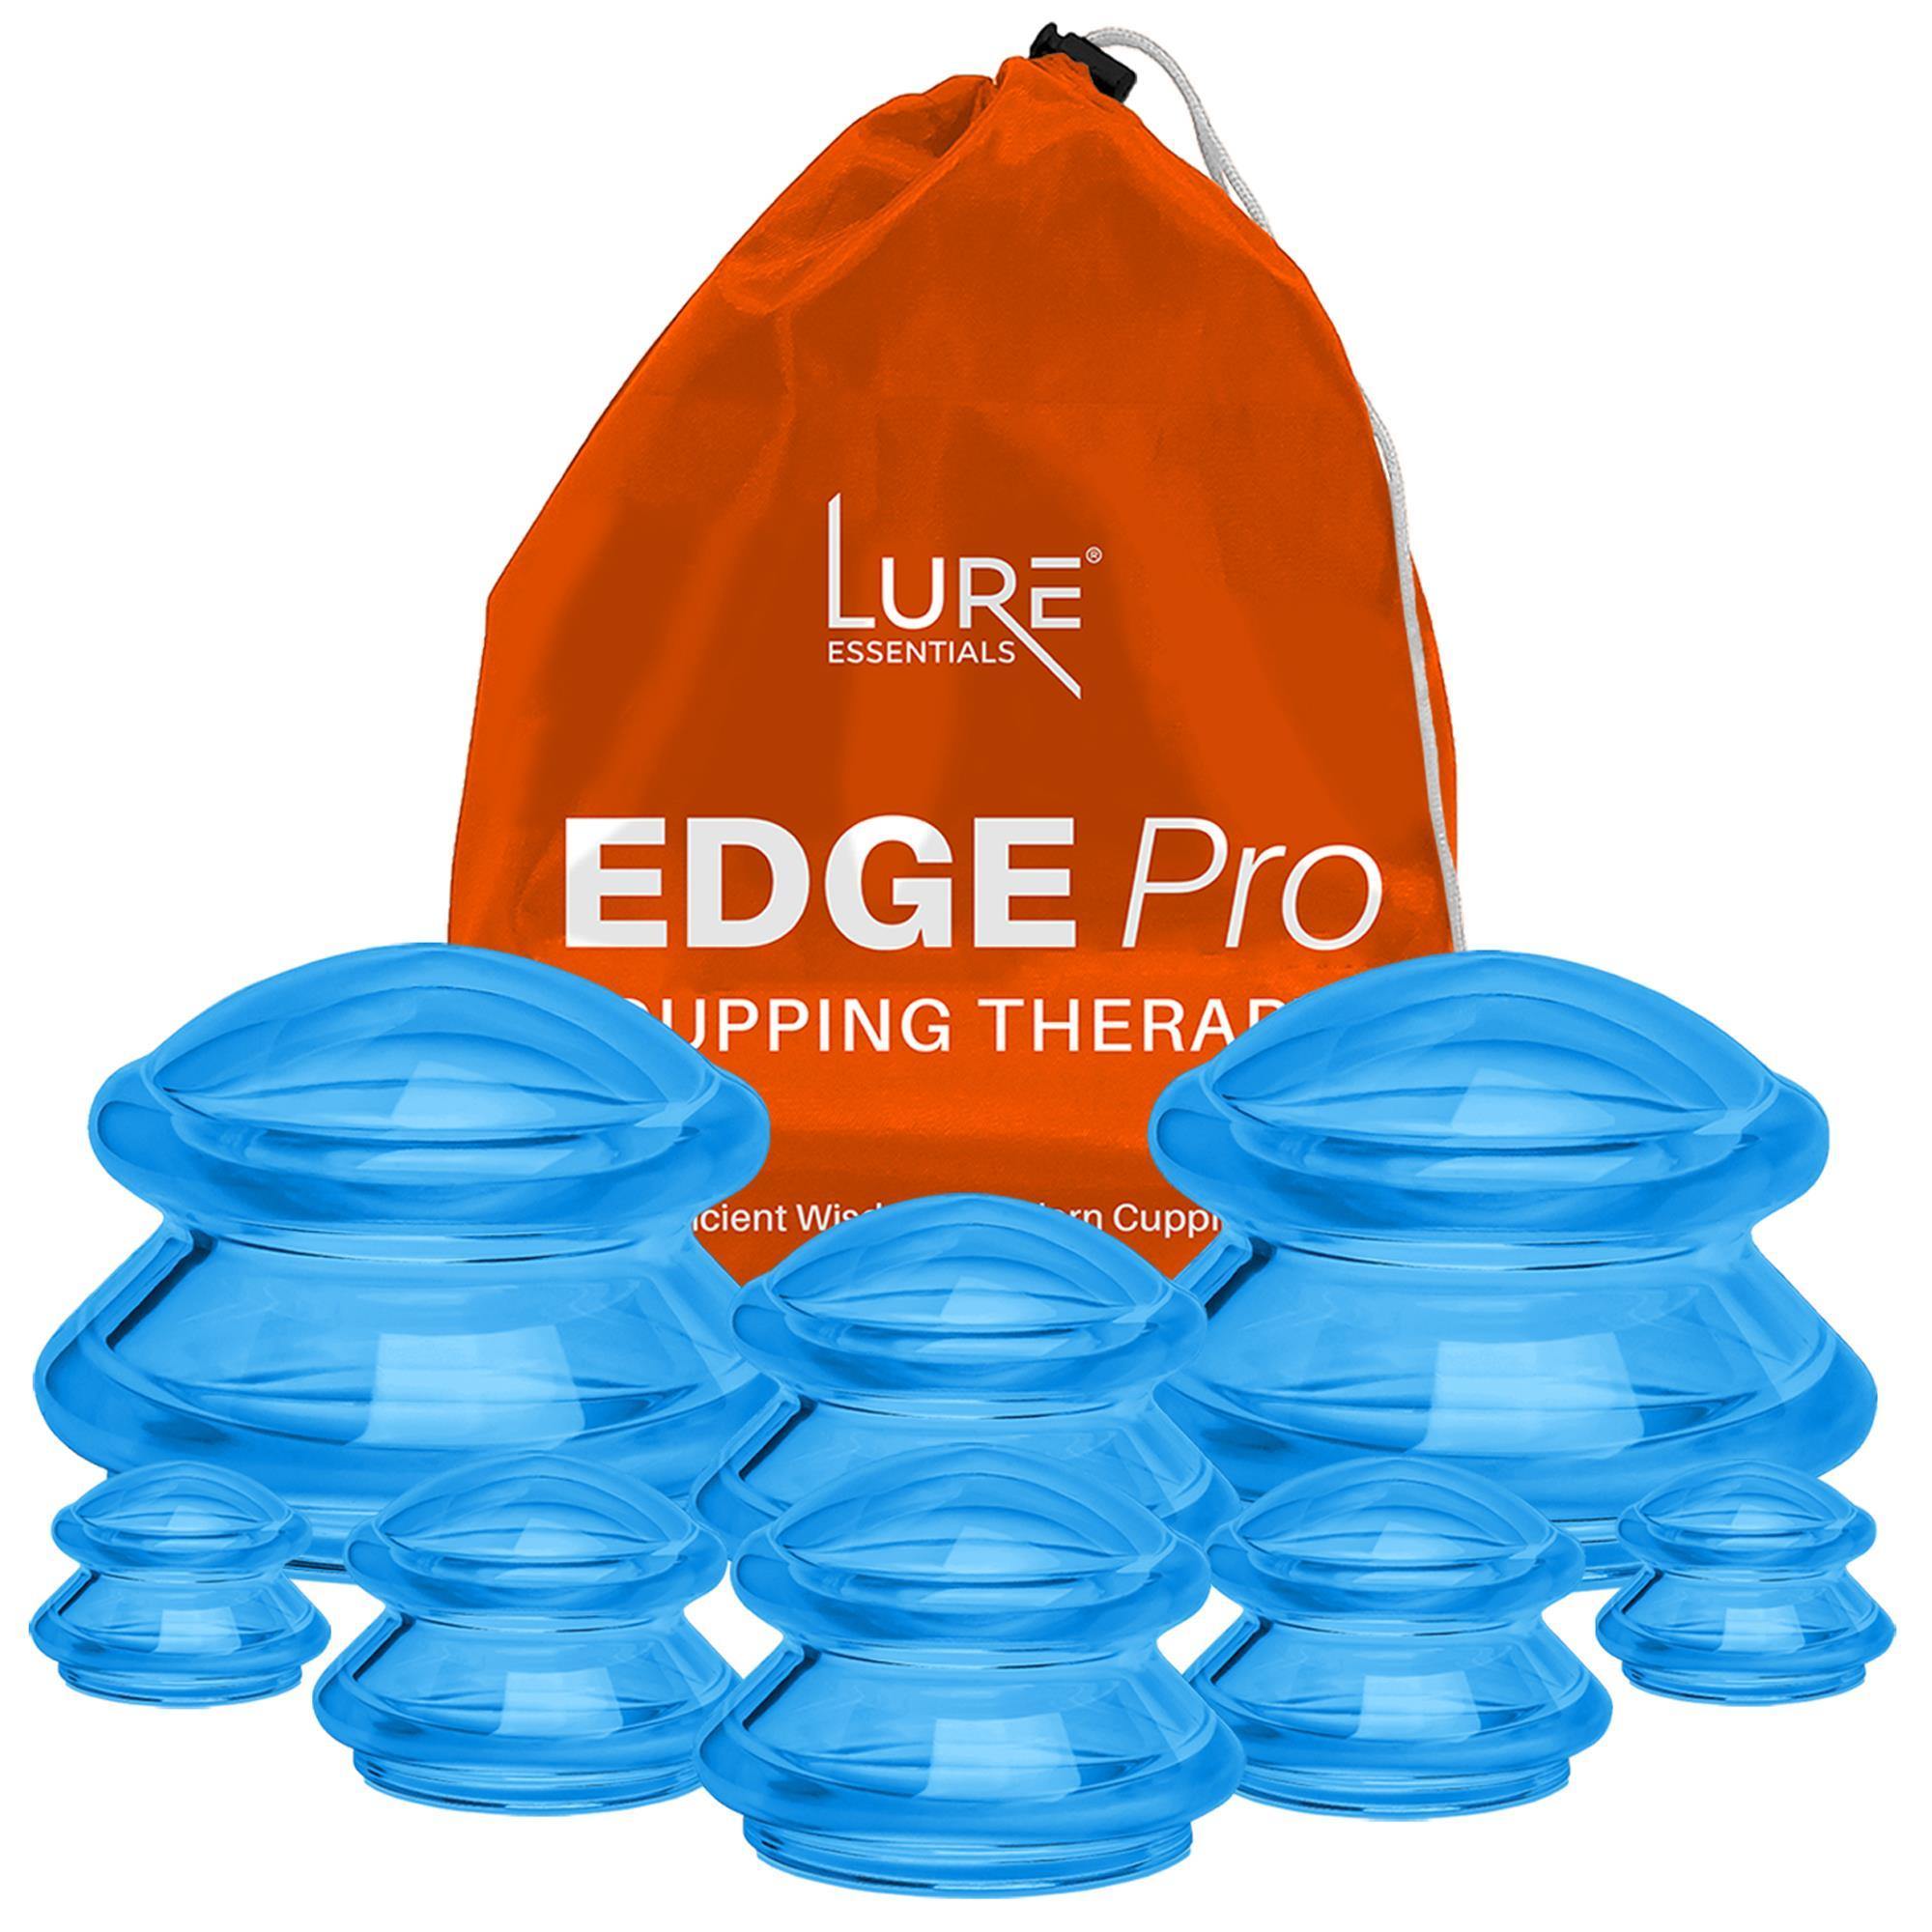 EDGE™ Cupping Pro Set of 8 - Blue - Lure Essentials